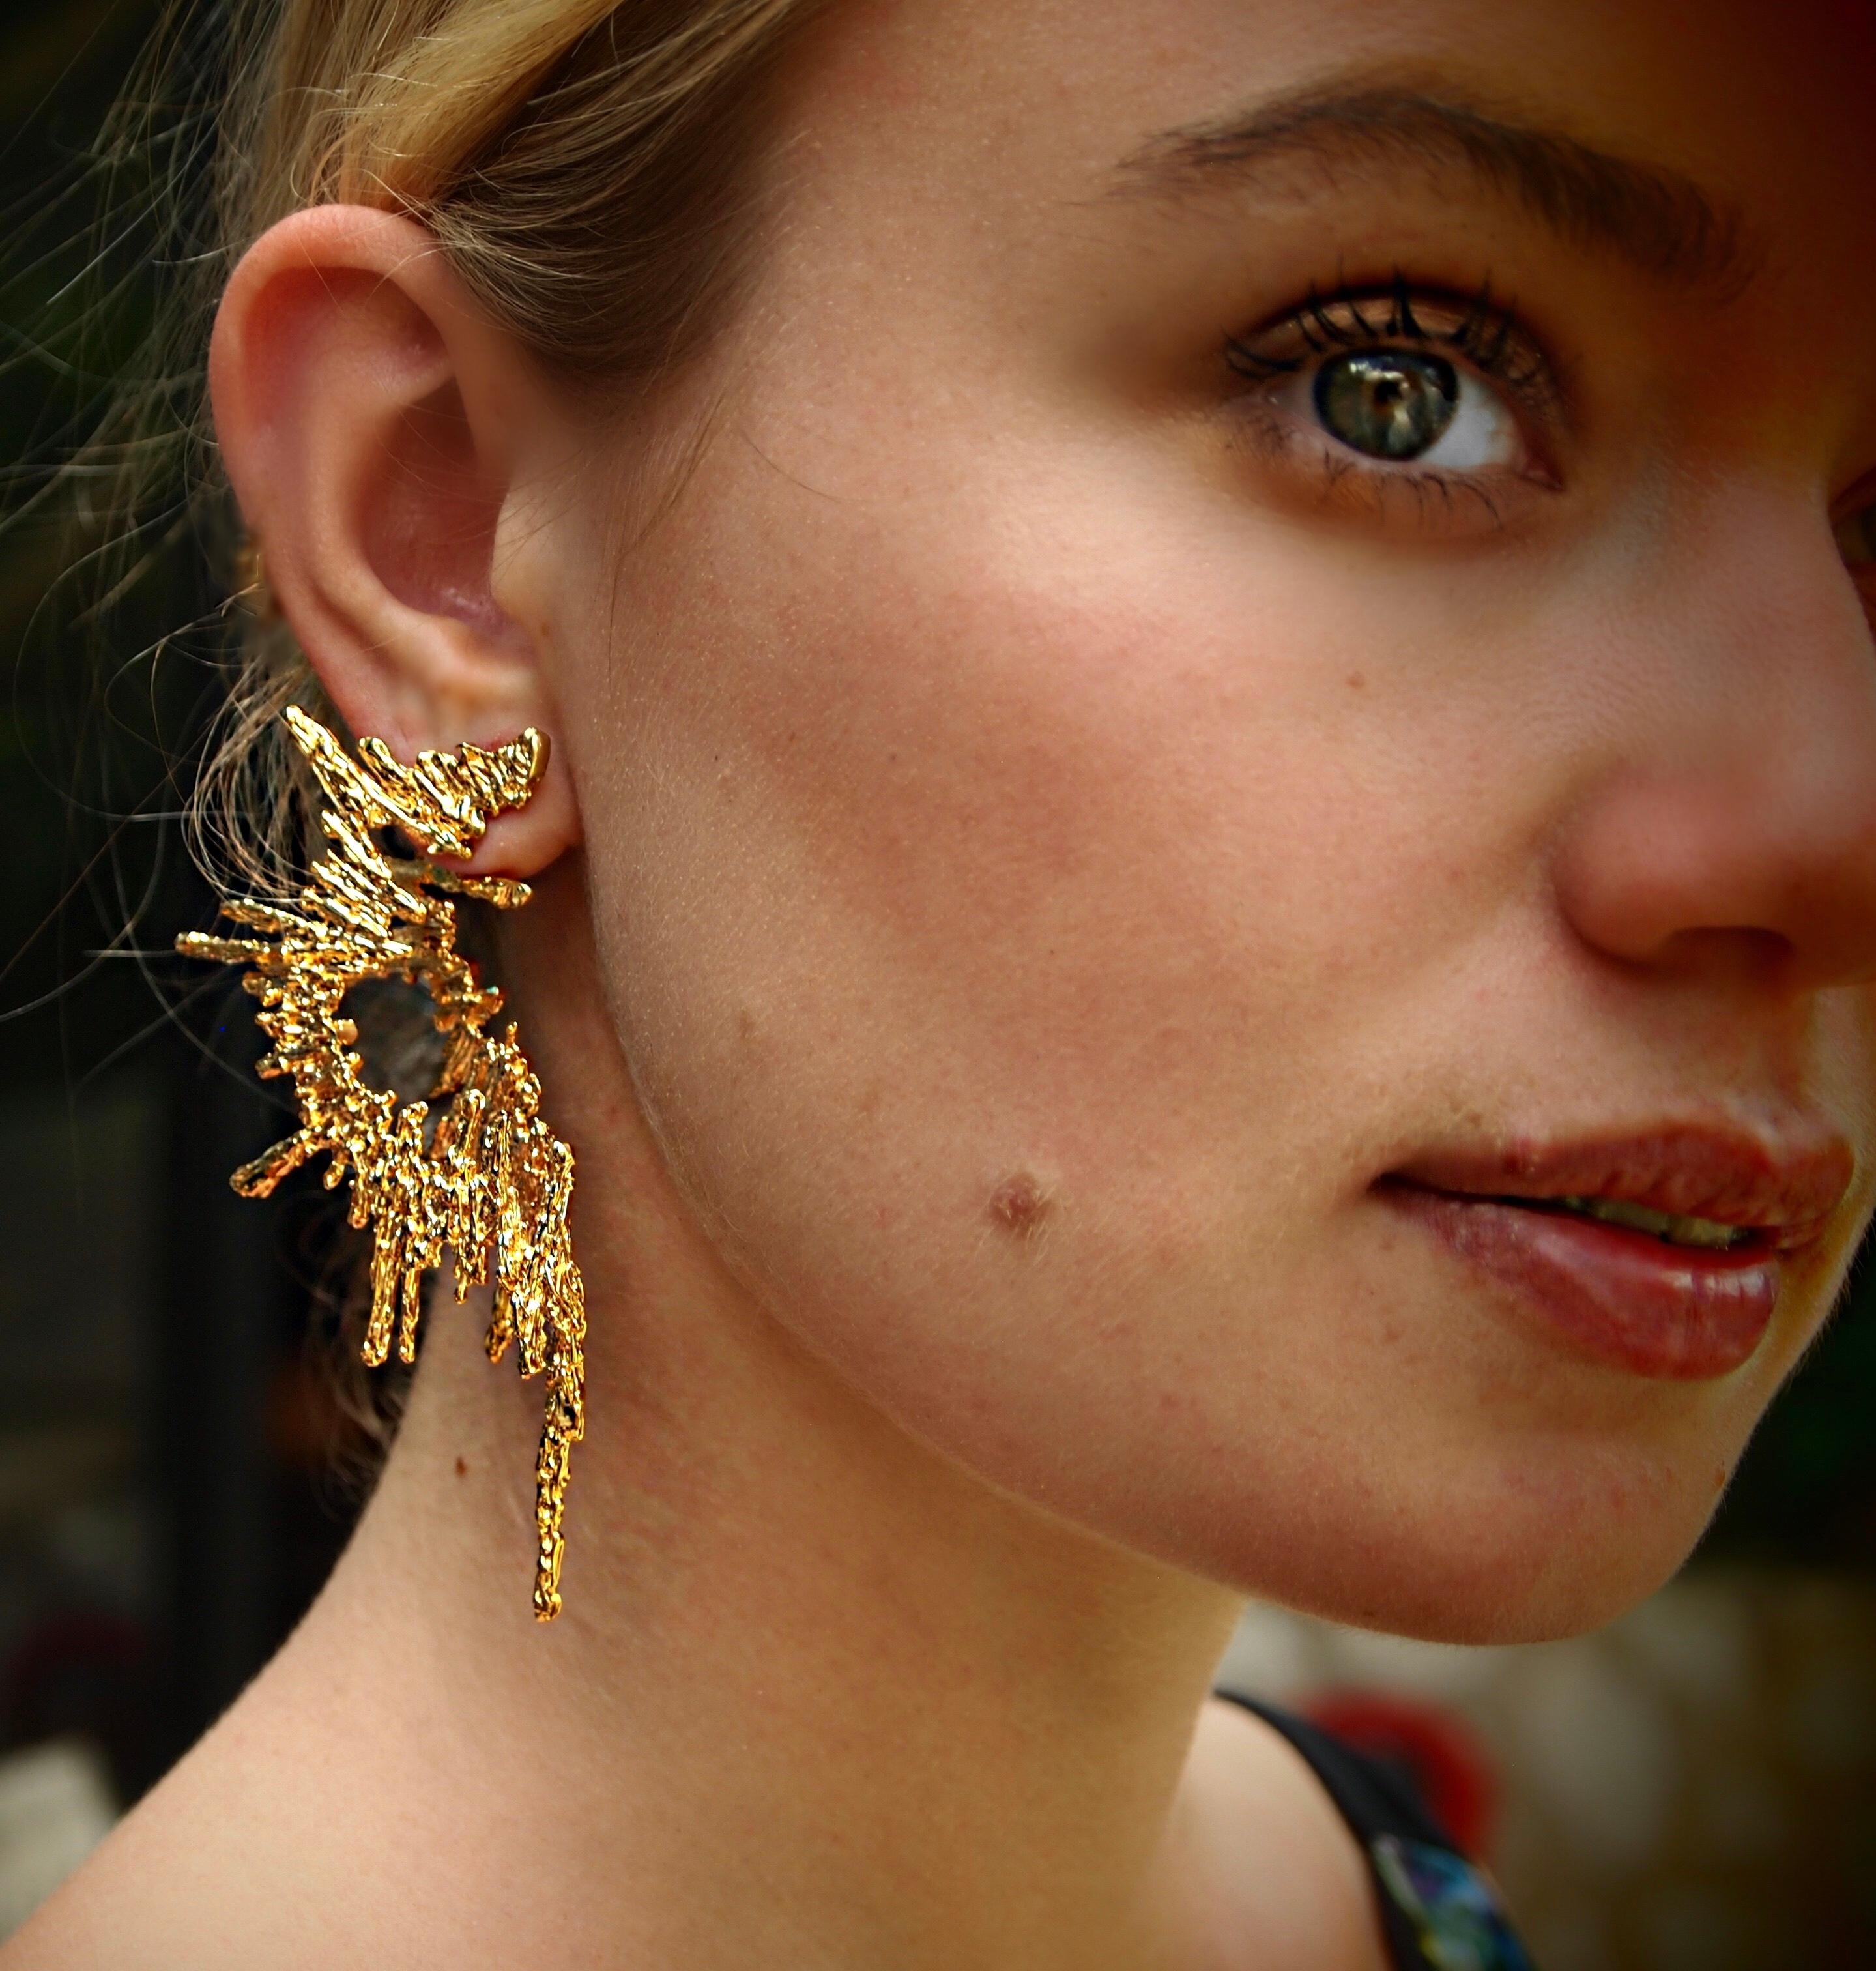 GBGH Jewelry Parallax Earrings in 18k Plated Brass.

Designed and created by Jacqueline Barbosa in New York.

GBGH is a bold and elegant jewelry brand based in NYC. GBGH stands for 